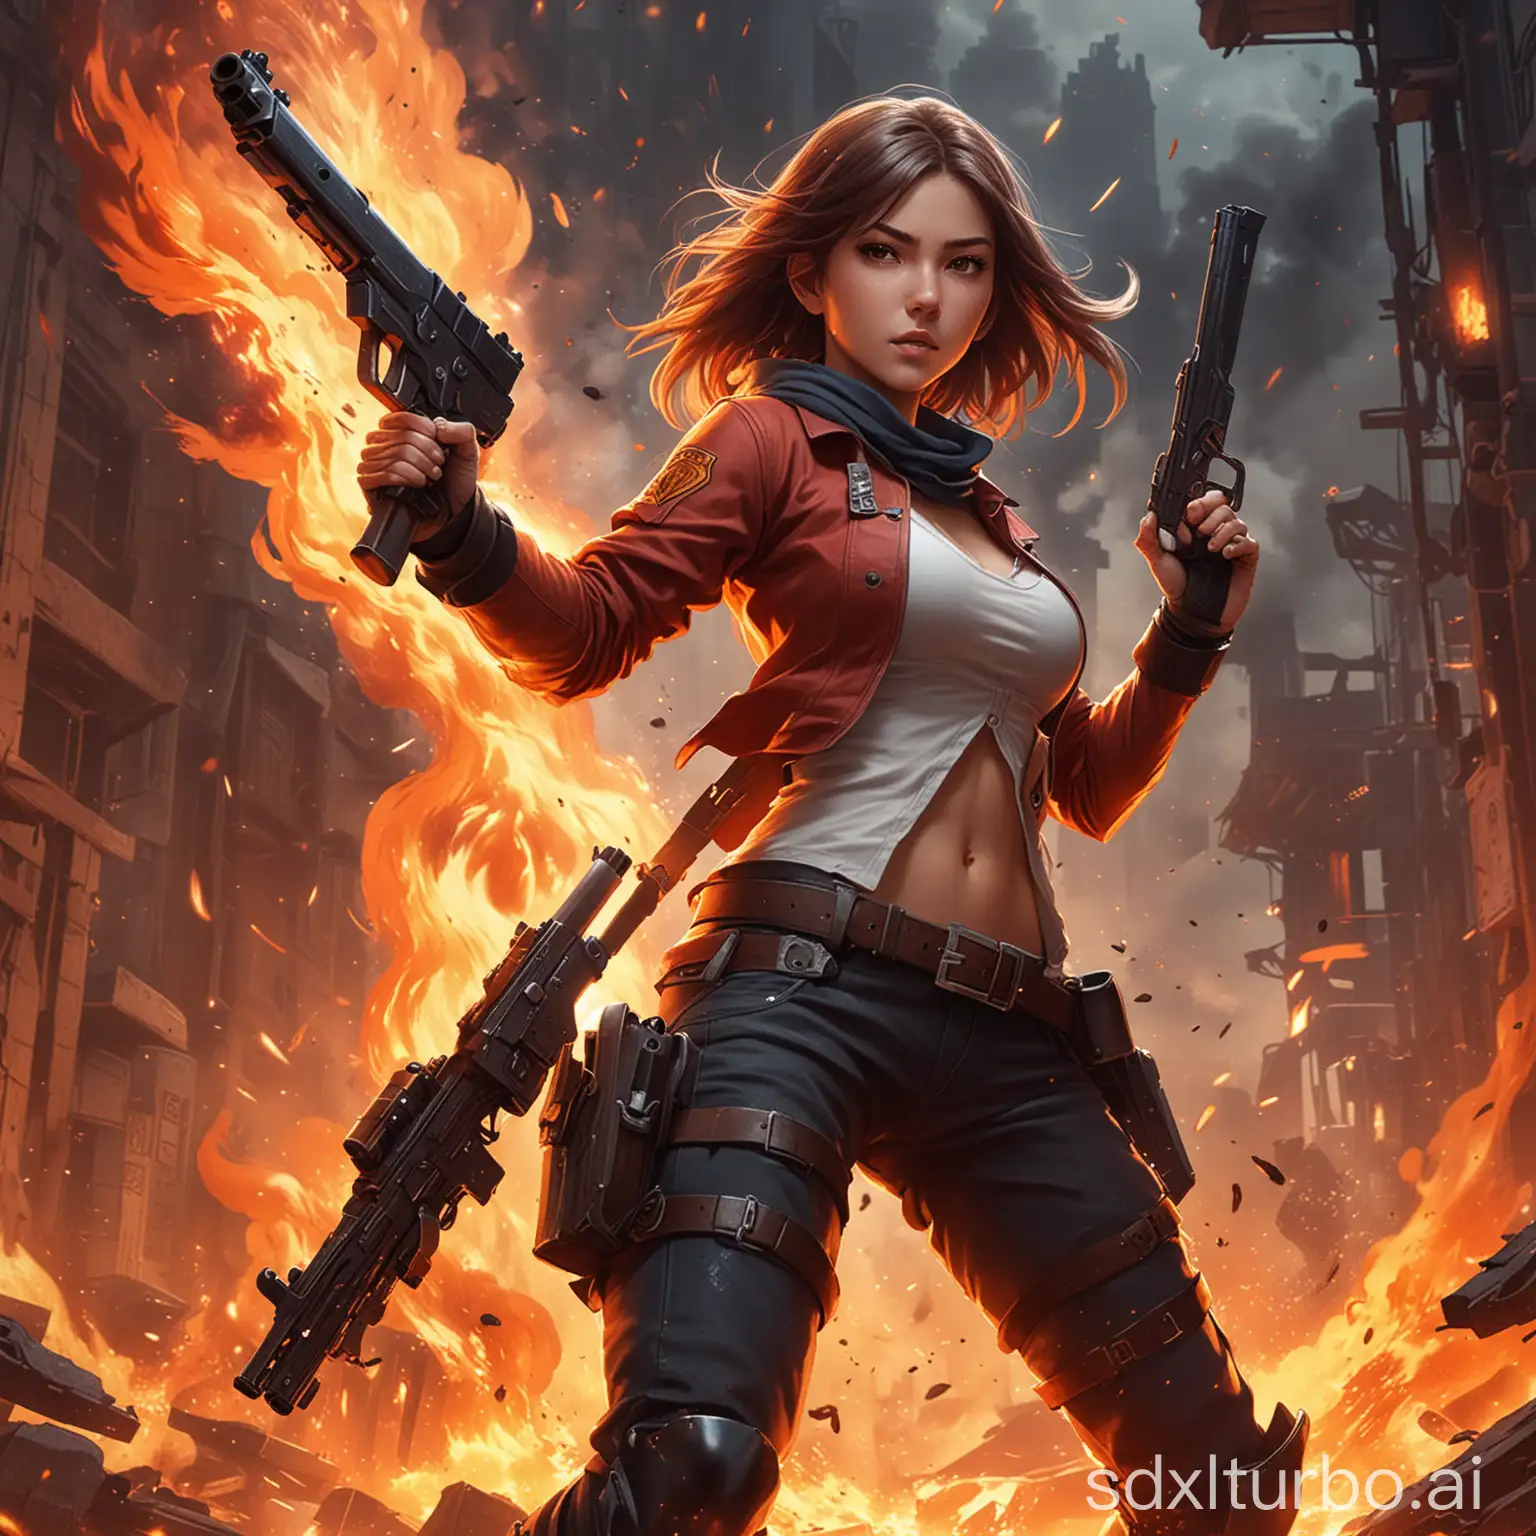 Animestyle-Battle-Action-Poster-Dynamic-Girl-with-Twin-Pistols-Amid-Blazing-Fire